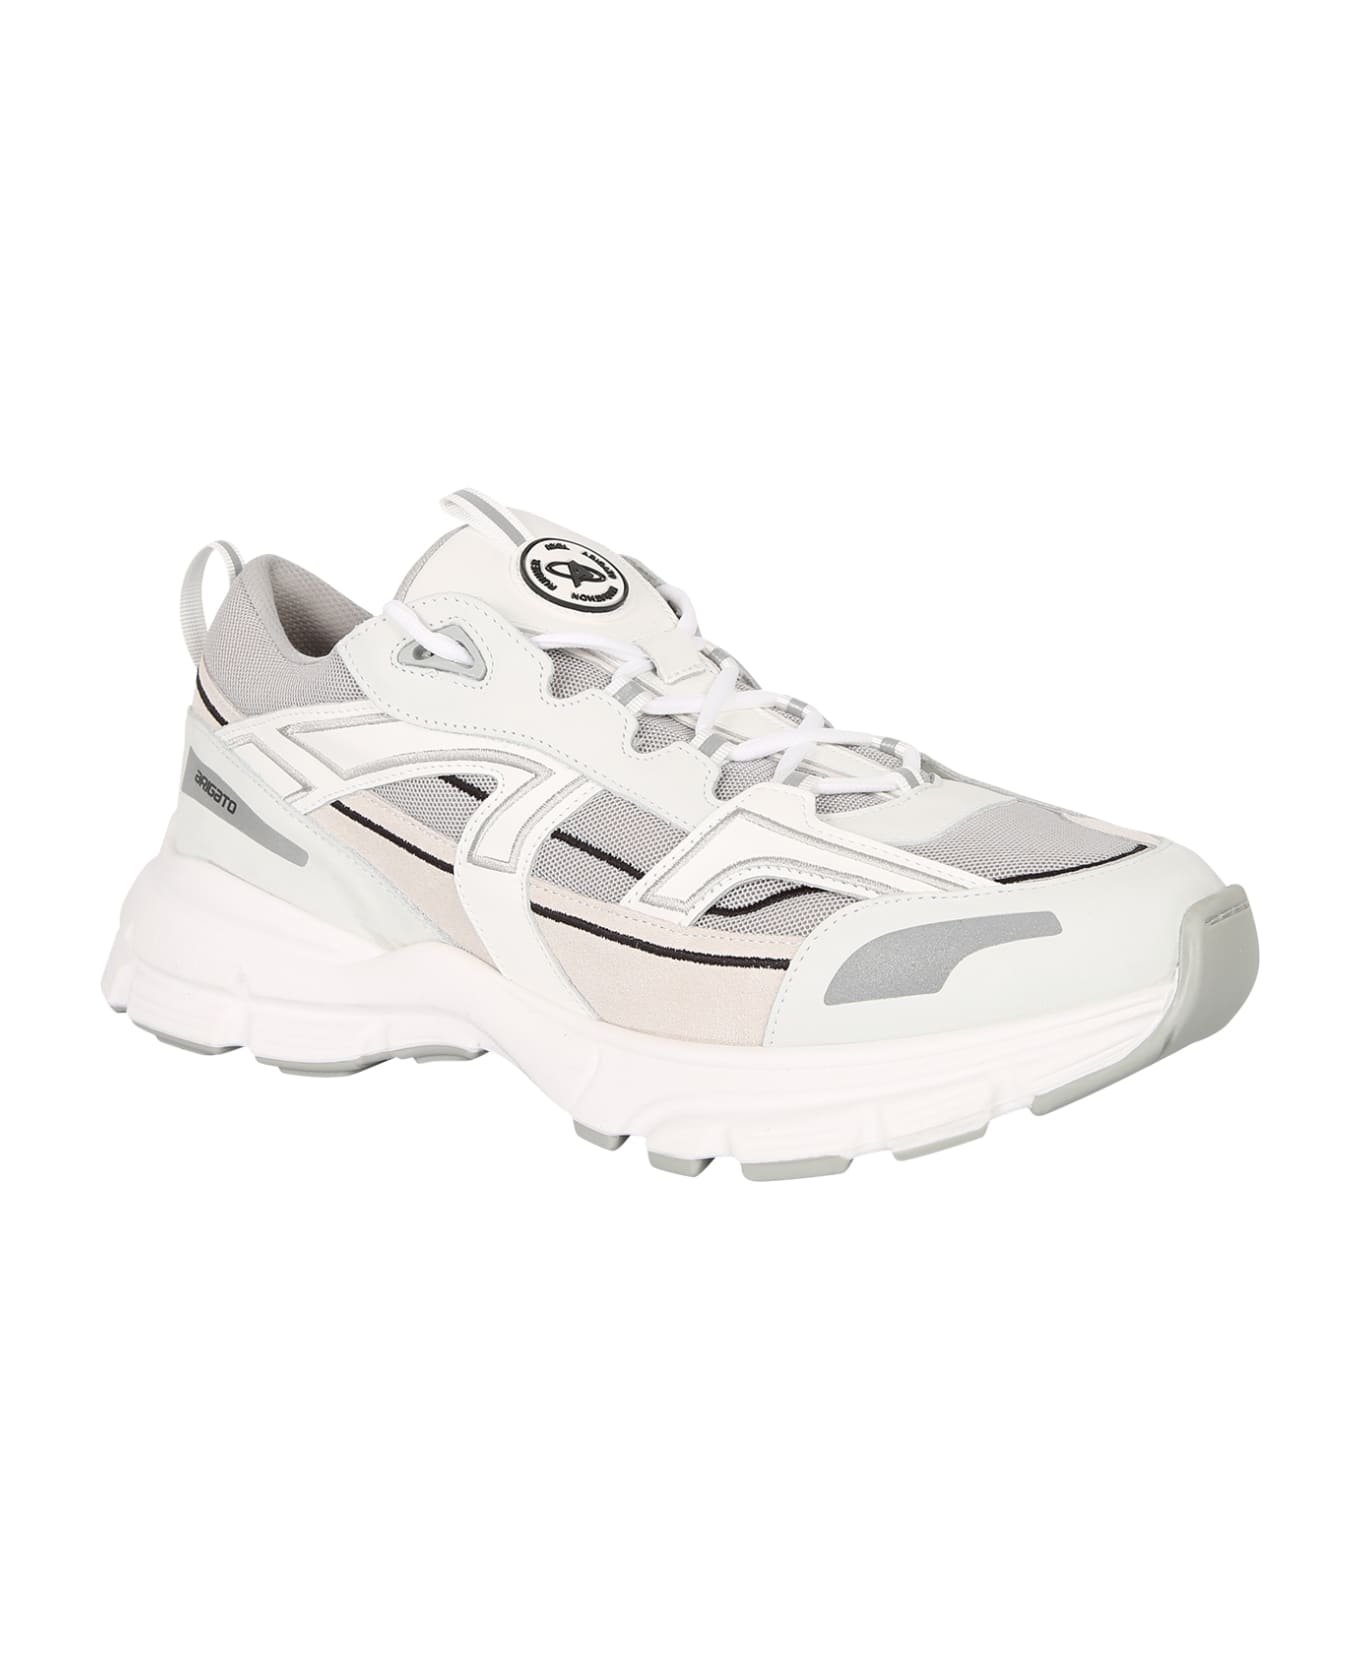 Axel Arigato Lace Up Sneakers - White